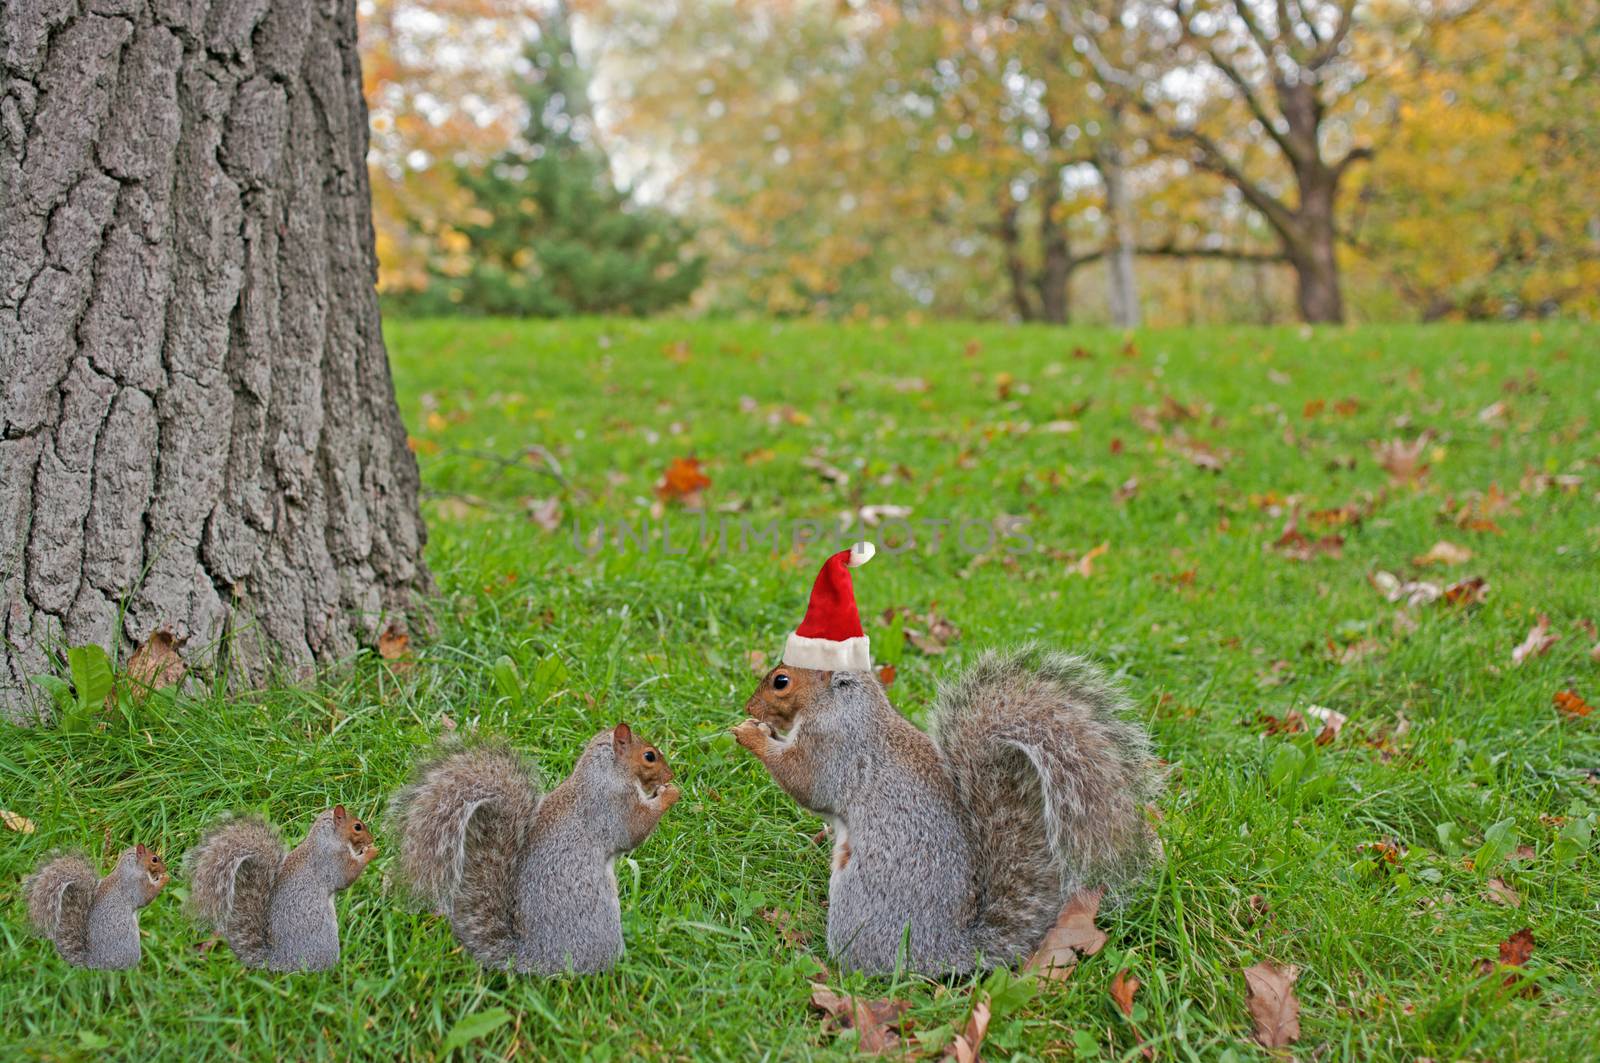 Eating squirrels wearing red Christmas hat sitting on the grass